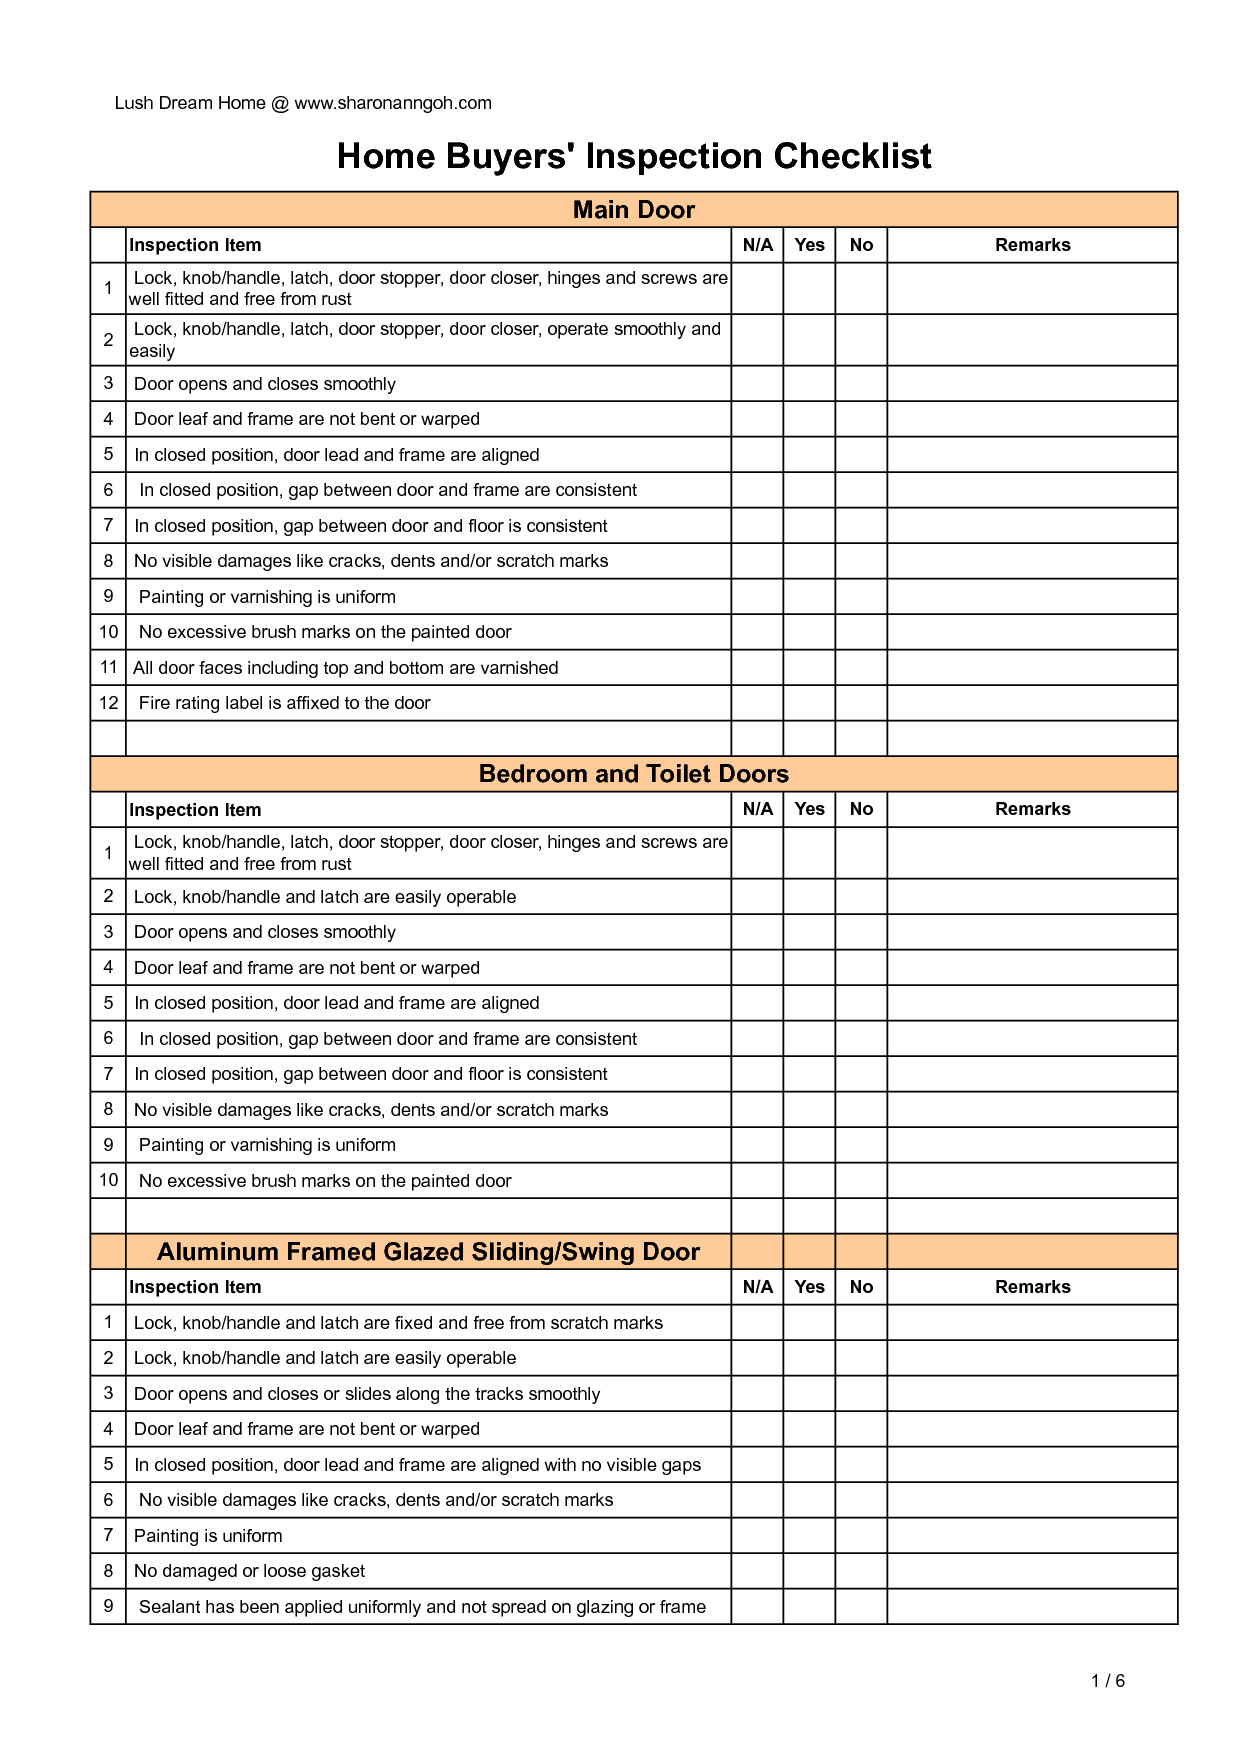 Home Inspection Checklist Excel Creating A Home Inspection Checklist Using Microsoft Excel